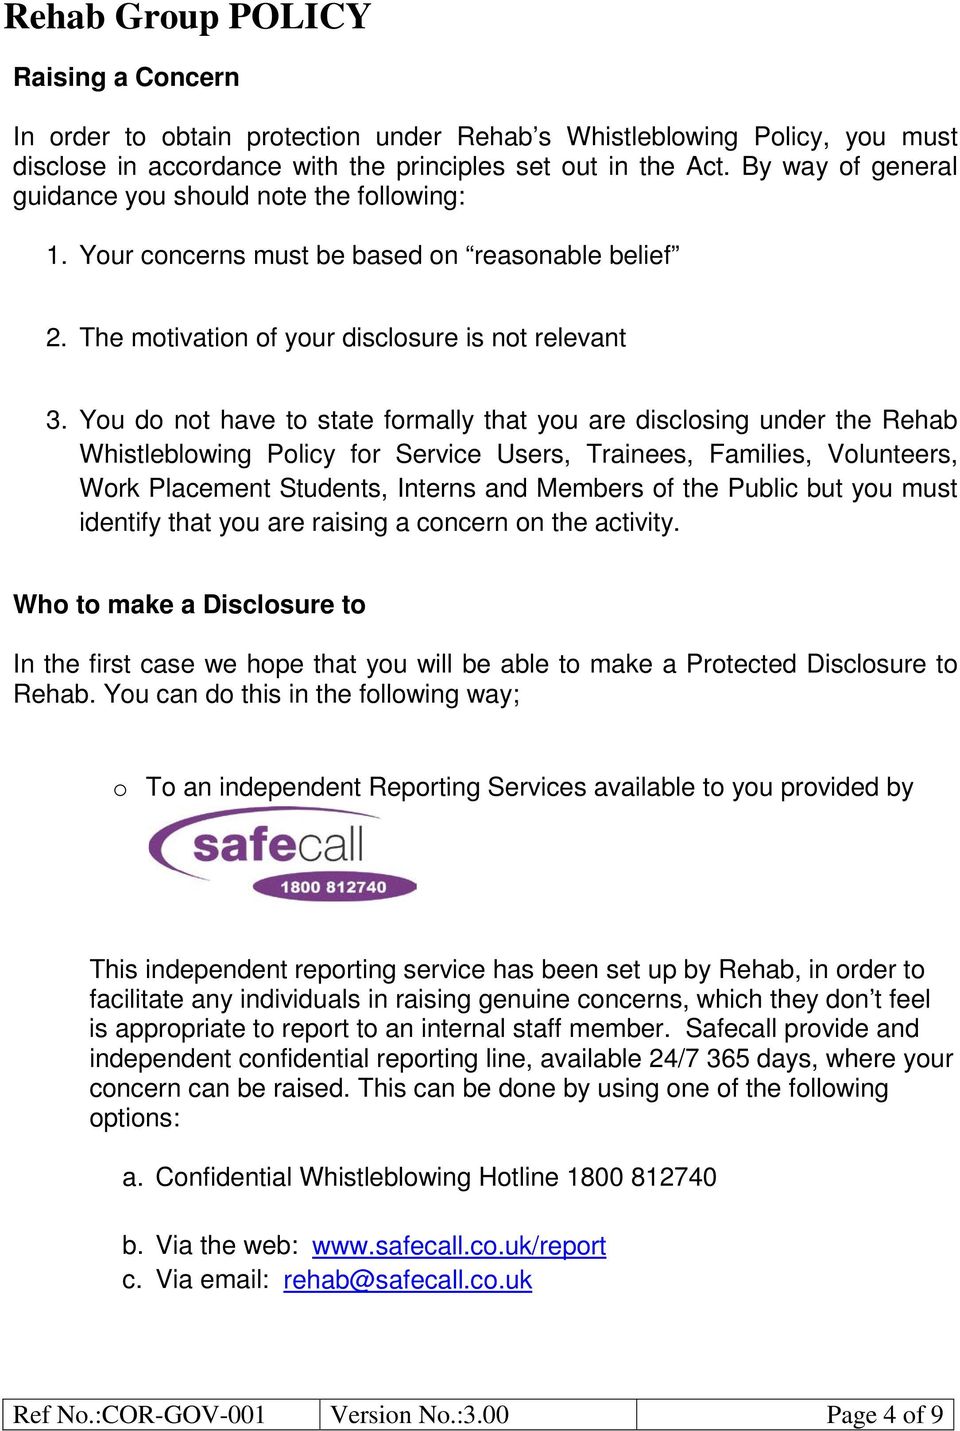 You do not have to state formally that you are disclosing under the Rehab Whistleblowing Policy for Service Users, Trainees, Families, Volunteers, Work Placement Students, Interns and Members of the